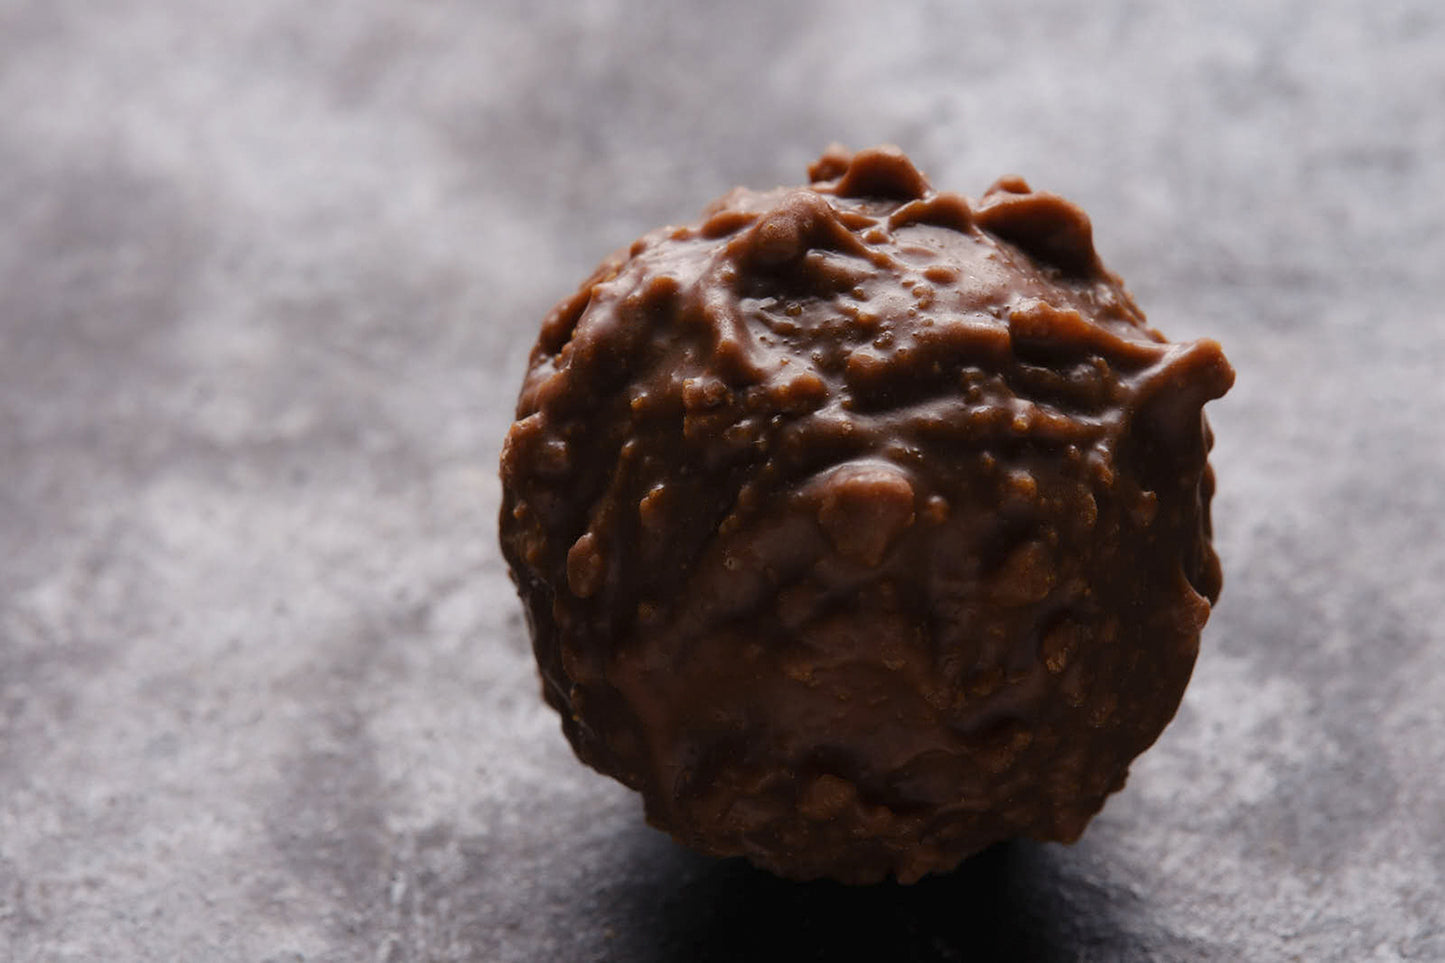 Caramelized Biscuit Truffles 105g